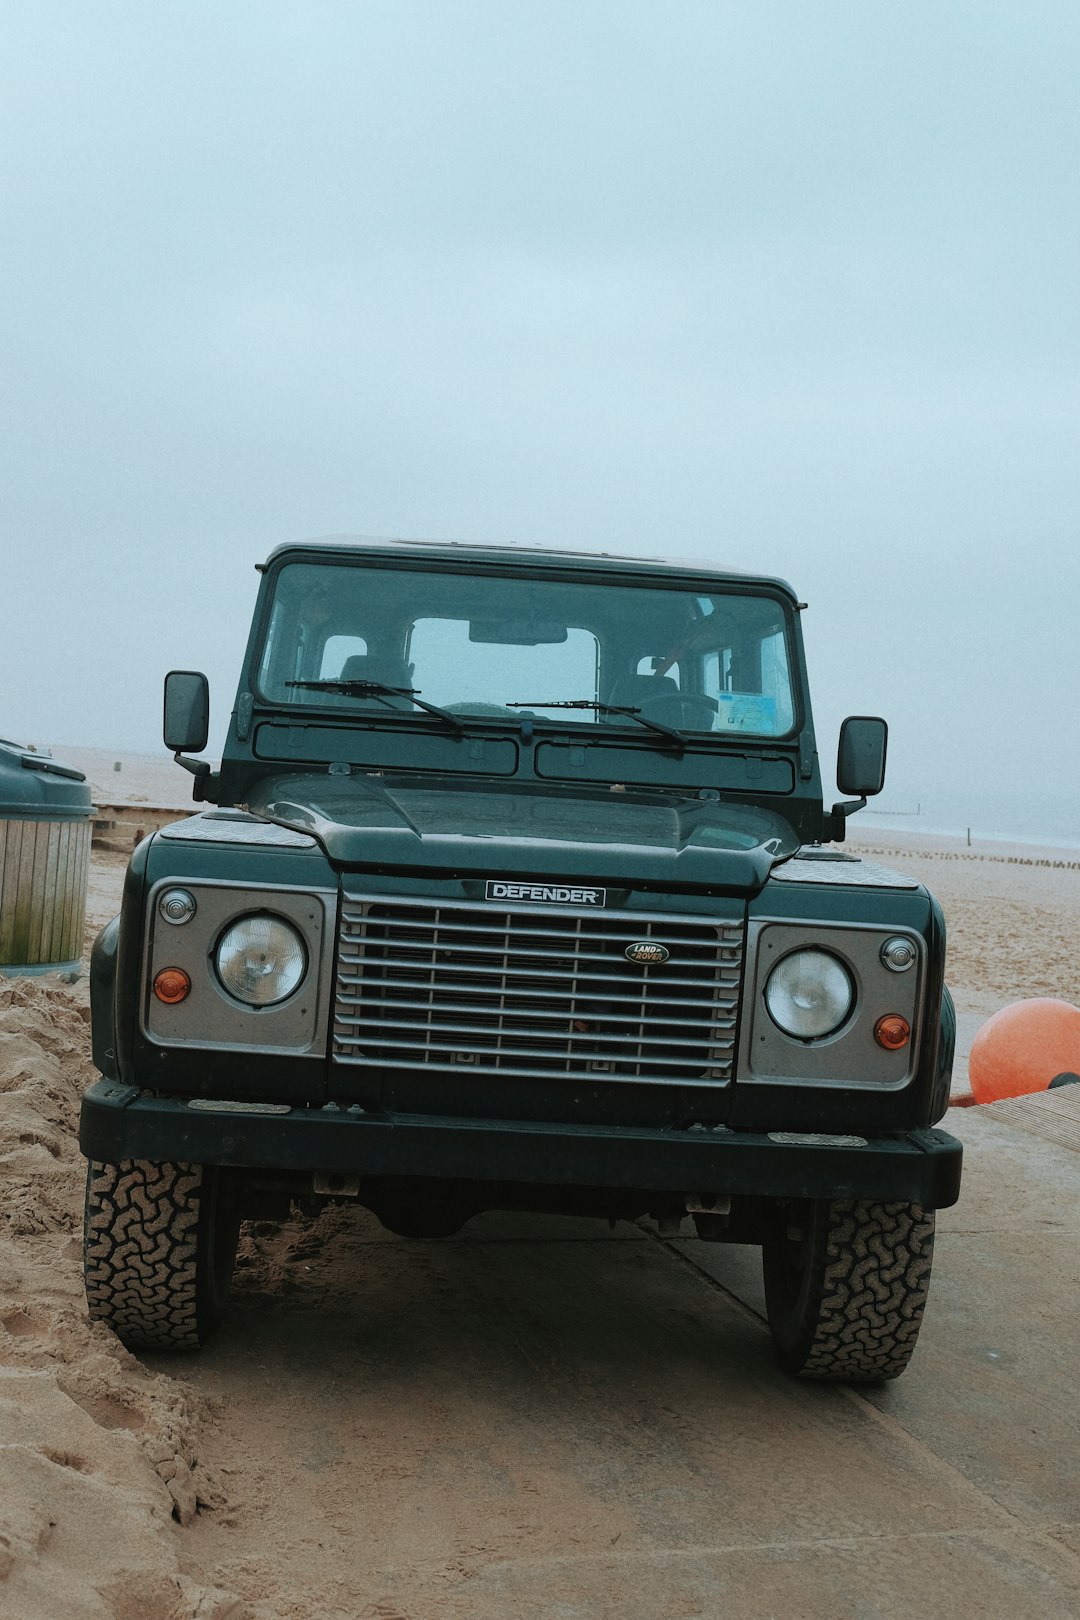 travelers stories about Off-roading in Domburg, Netherlands